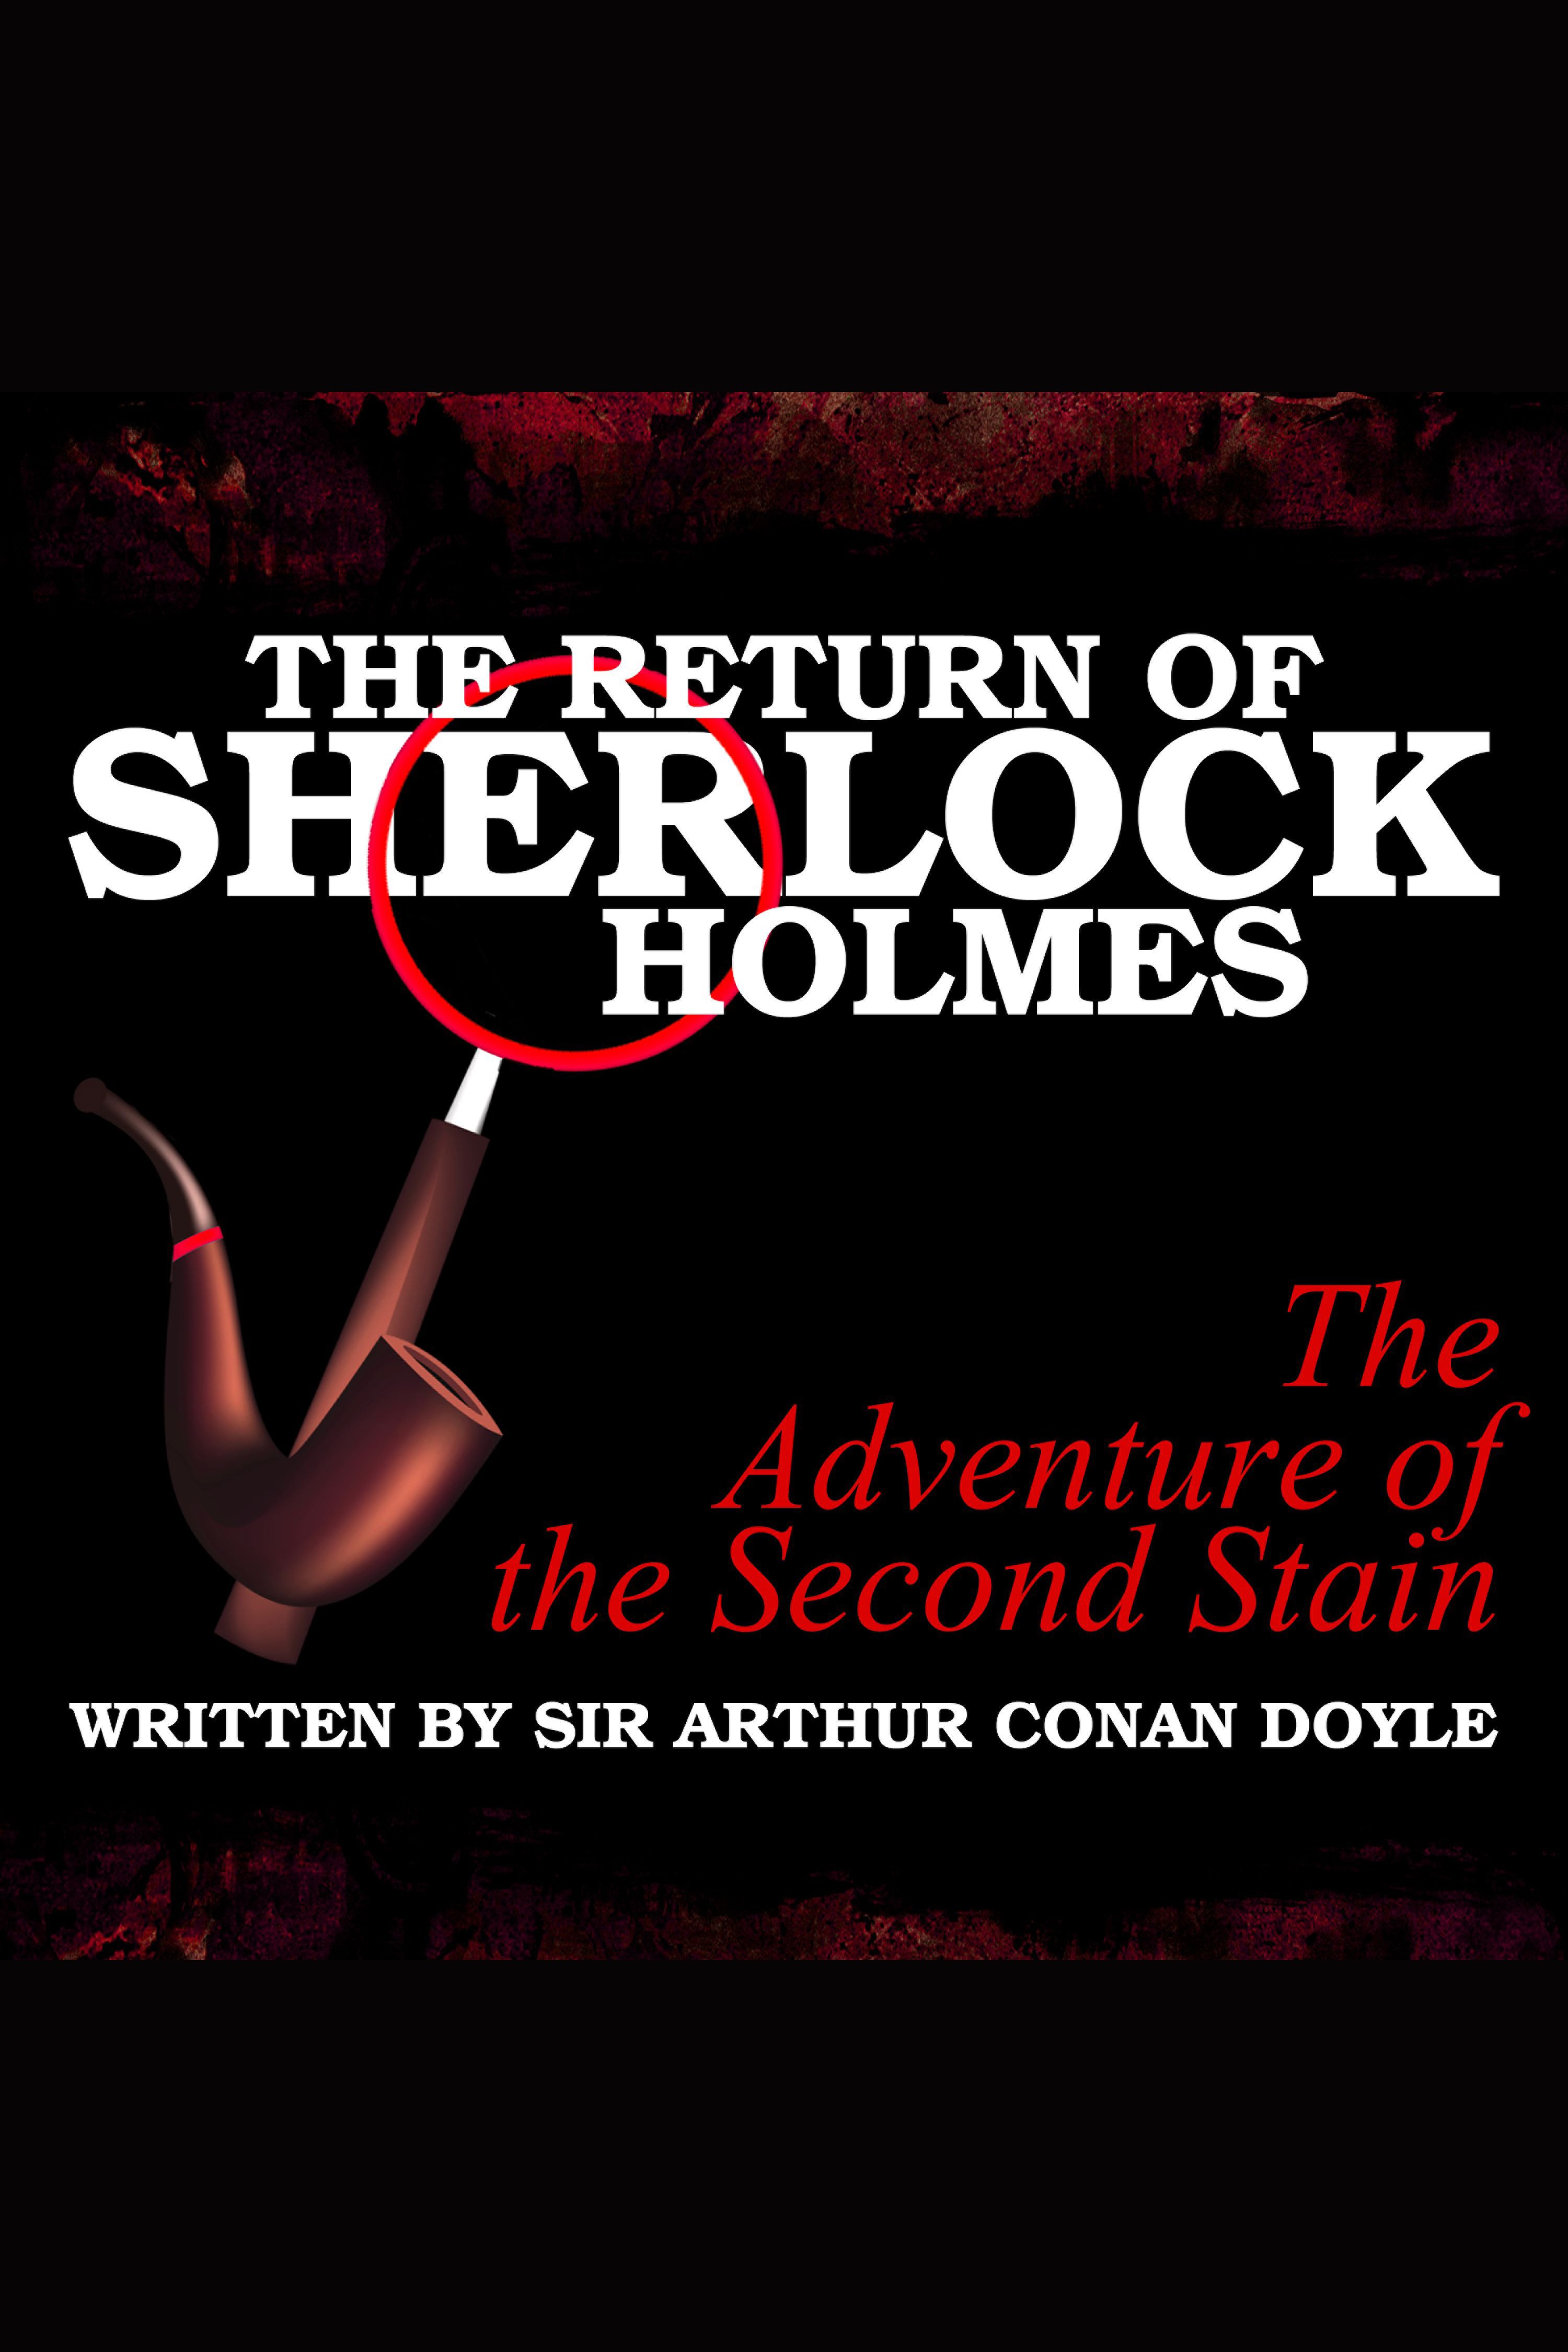 The Return of Sherlock Holmes - The Adventure of the Second Stain cover image